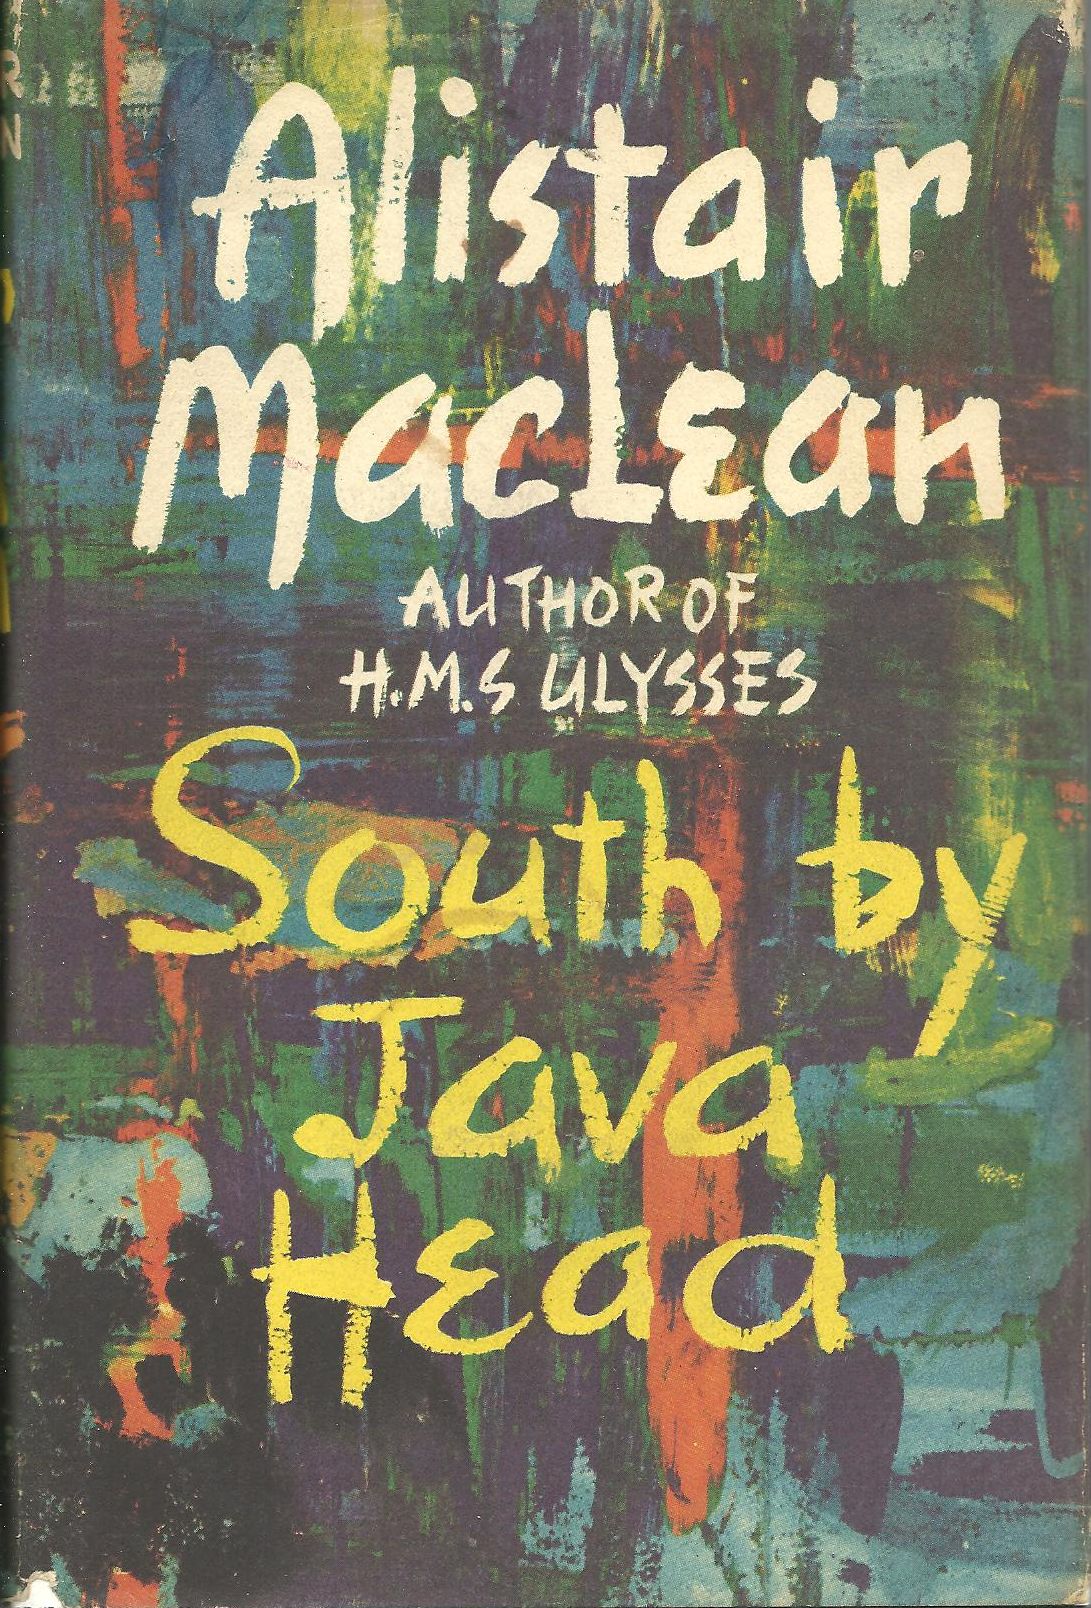 South by Java Head - UK first edition